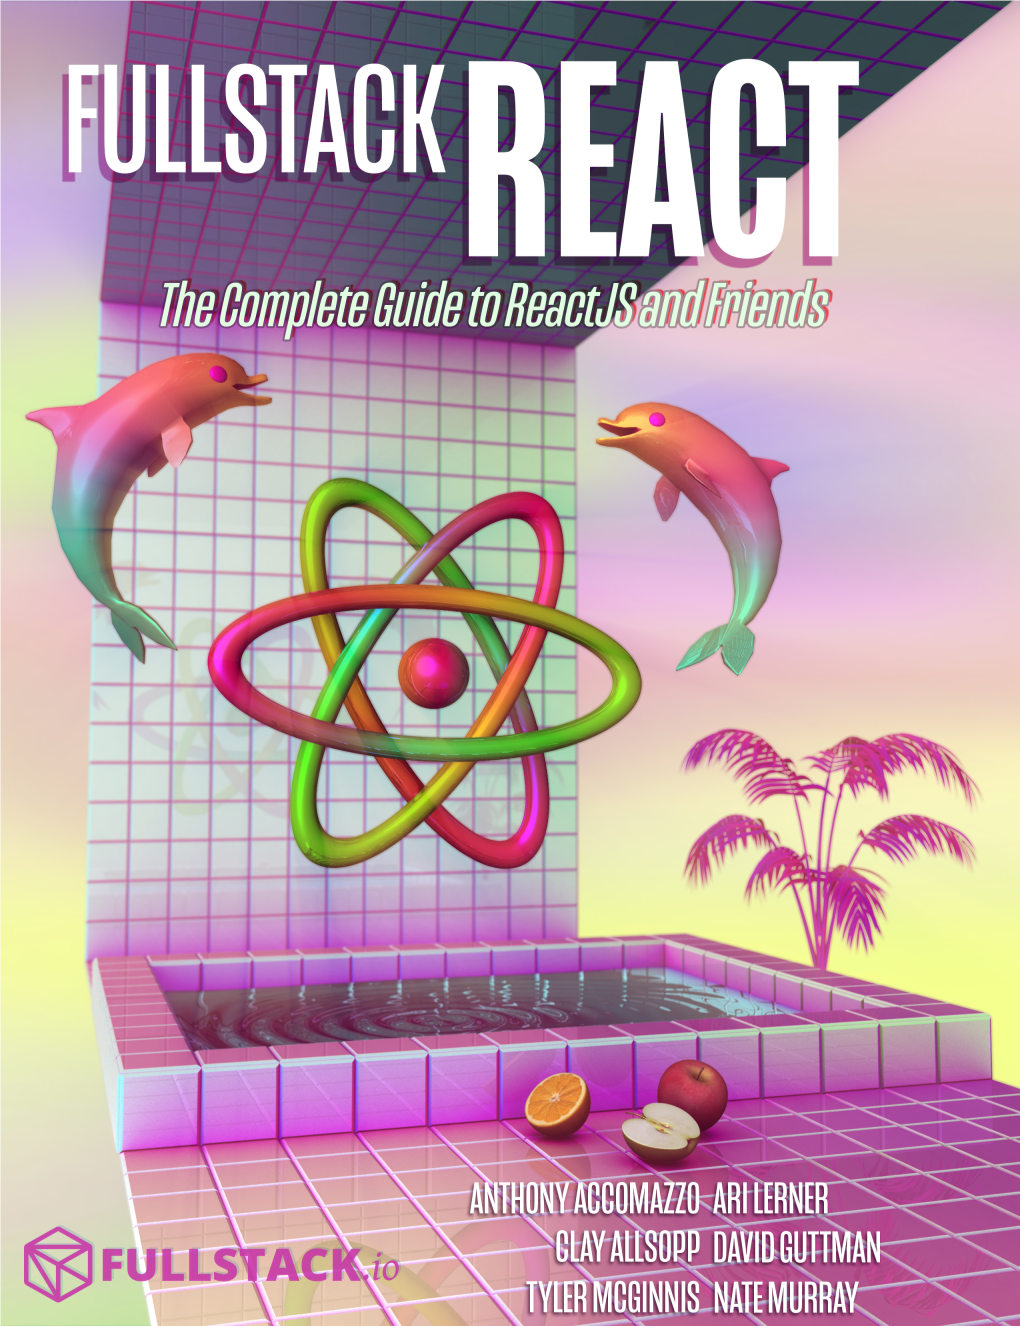 Fullstack React the Complete Guide to Reactjs and Friends